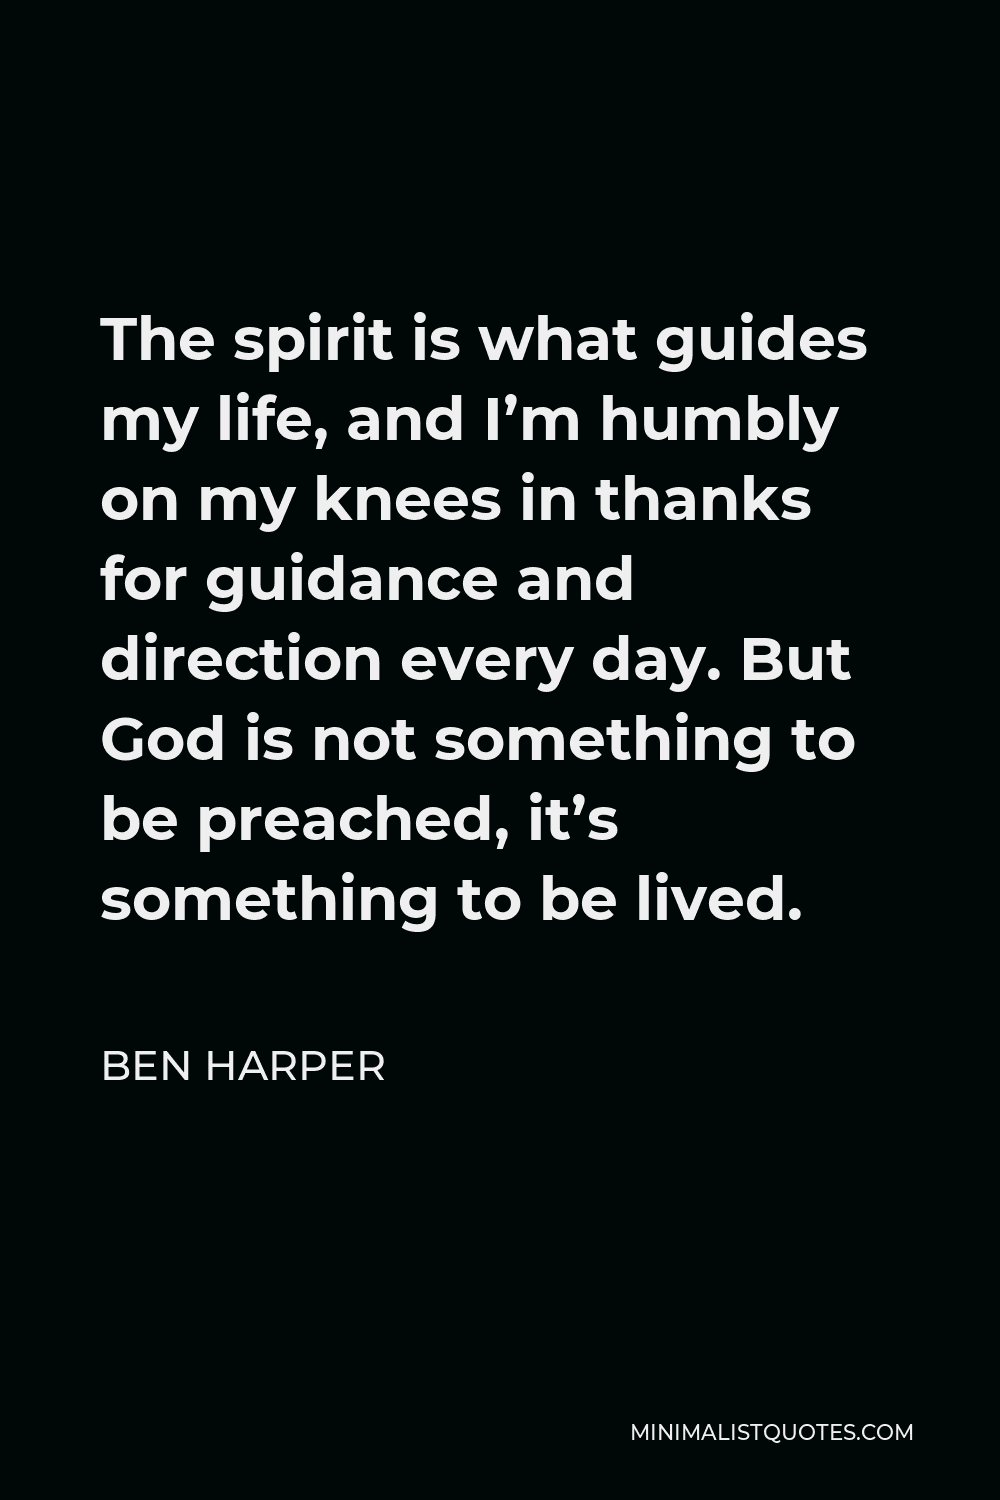 Ben Harper Quote - The spirit is what guides my life, and I’m humbly on my knees in thanks for guidance and direction every day. But God is not something to be preached, it’s something to be lived.